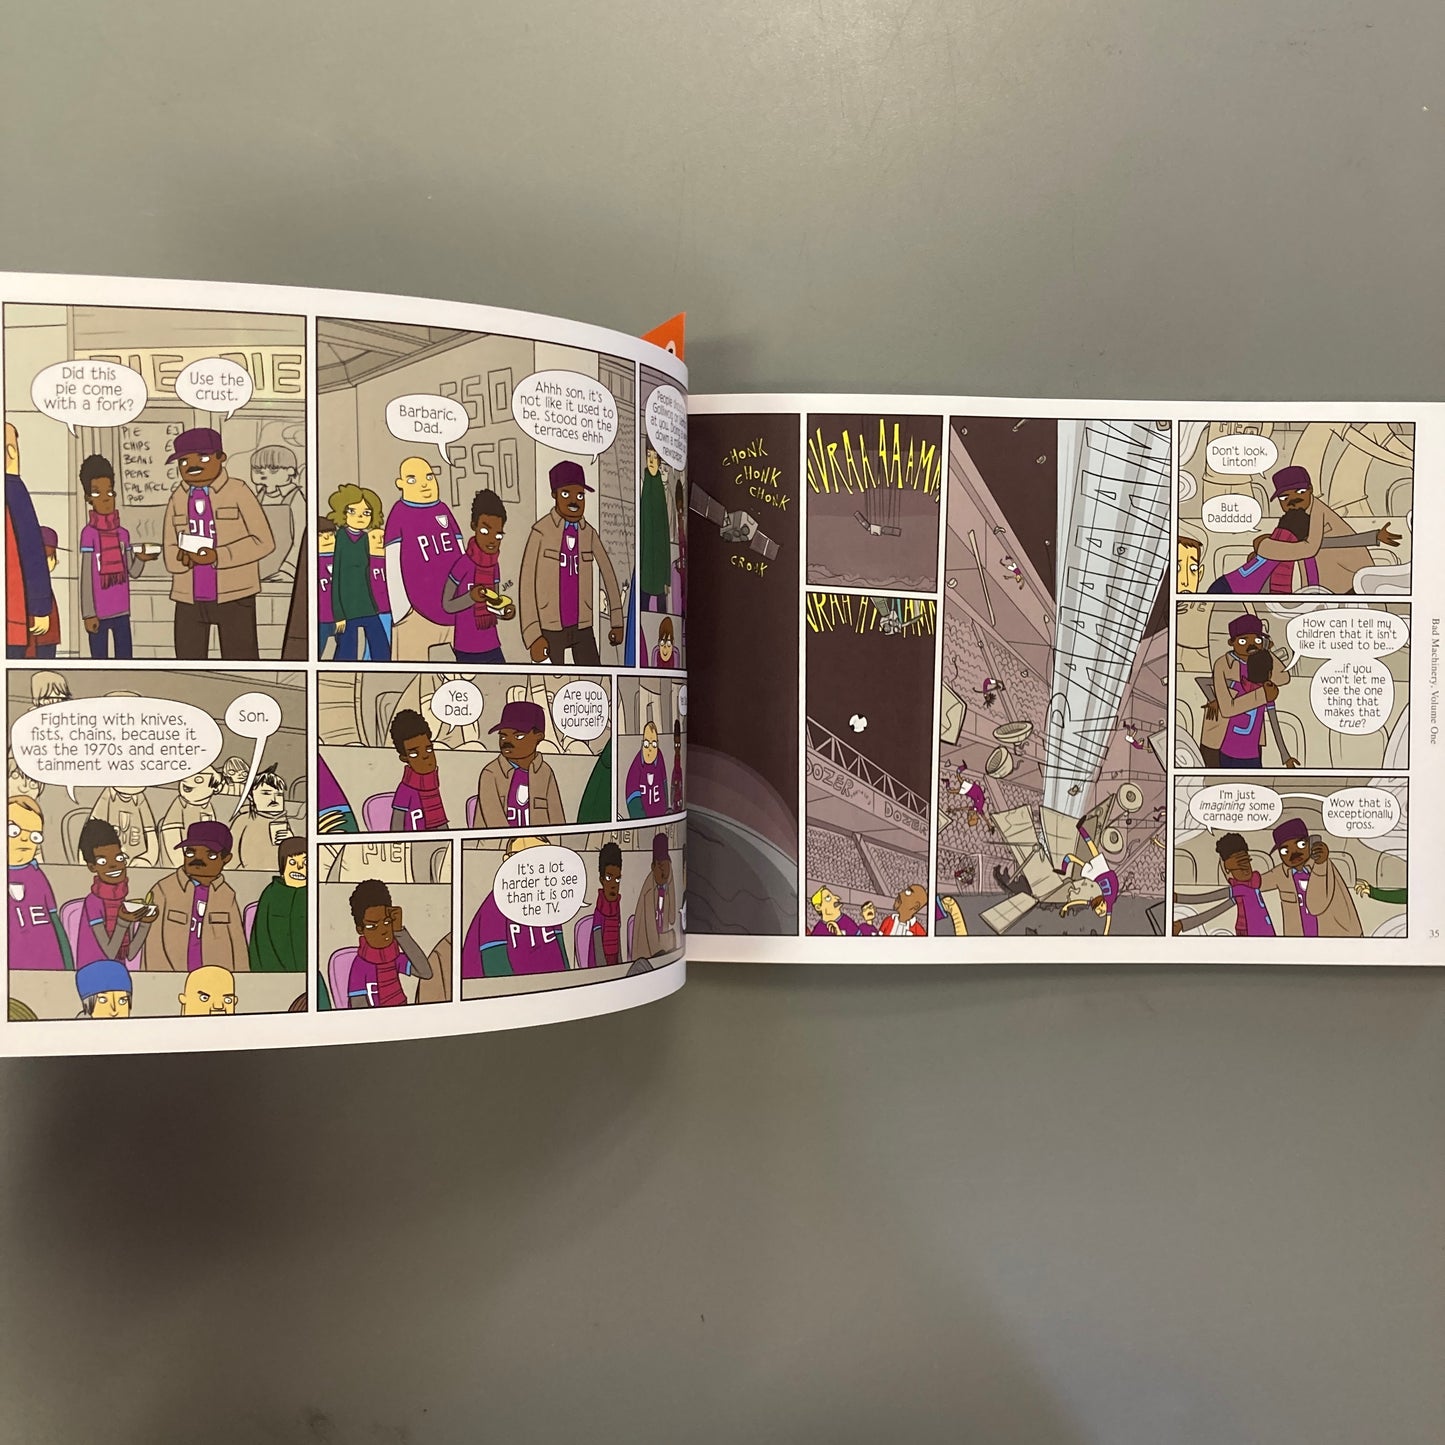 Bad Machinery: The Case of the Team Spirit (Pocket Edition)